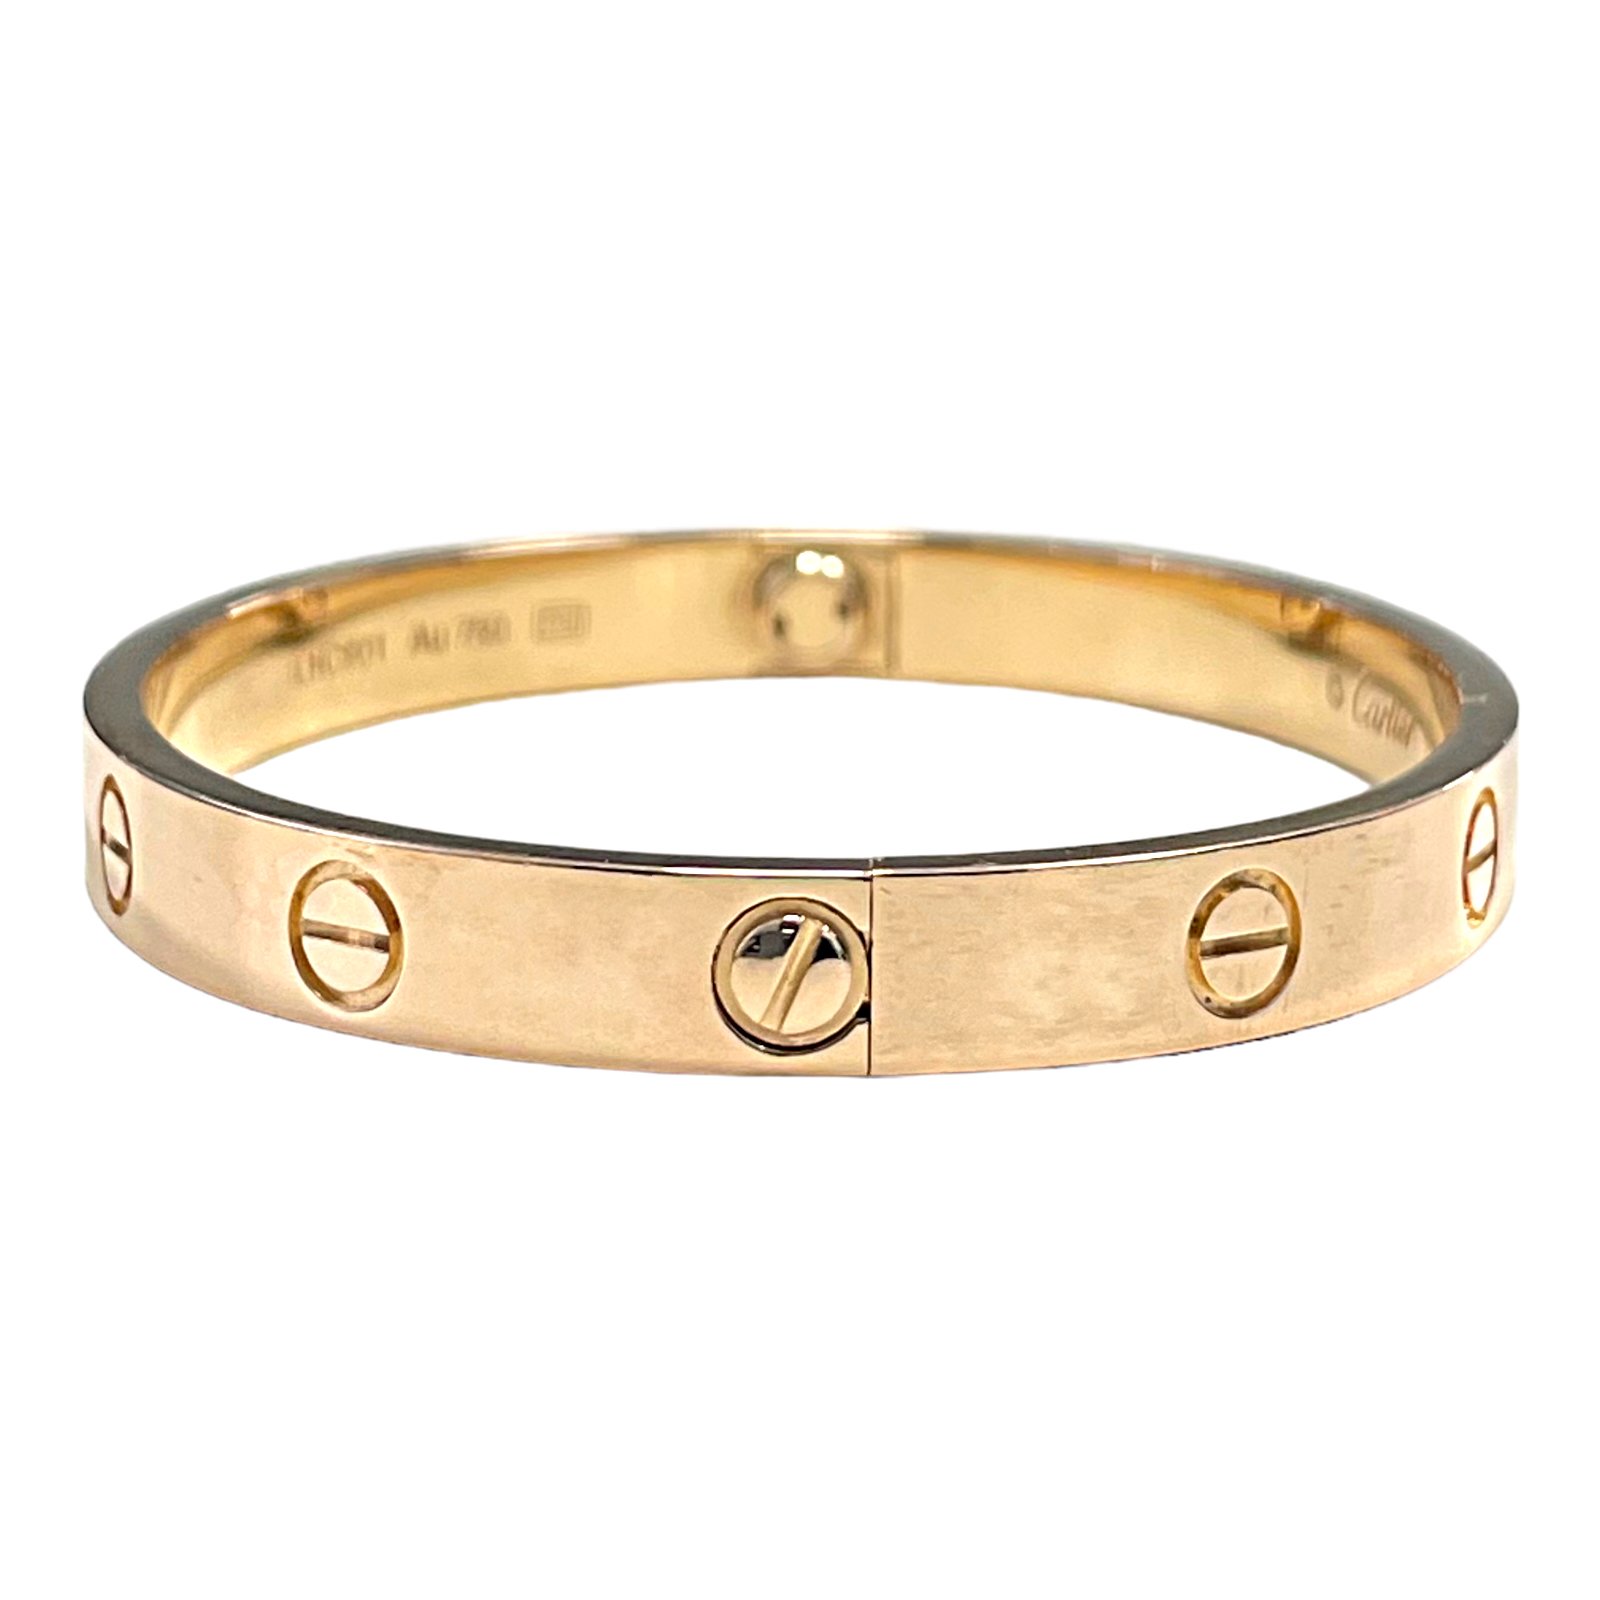 STYX Watch Protection - Cartier Love Bracelet Protection